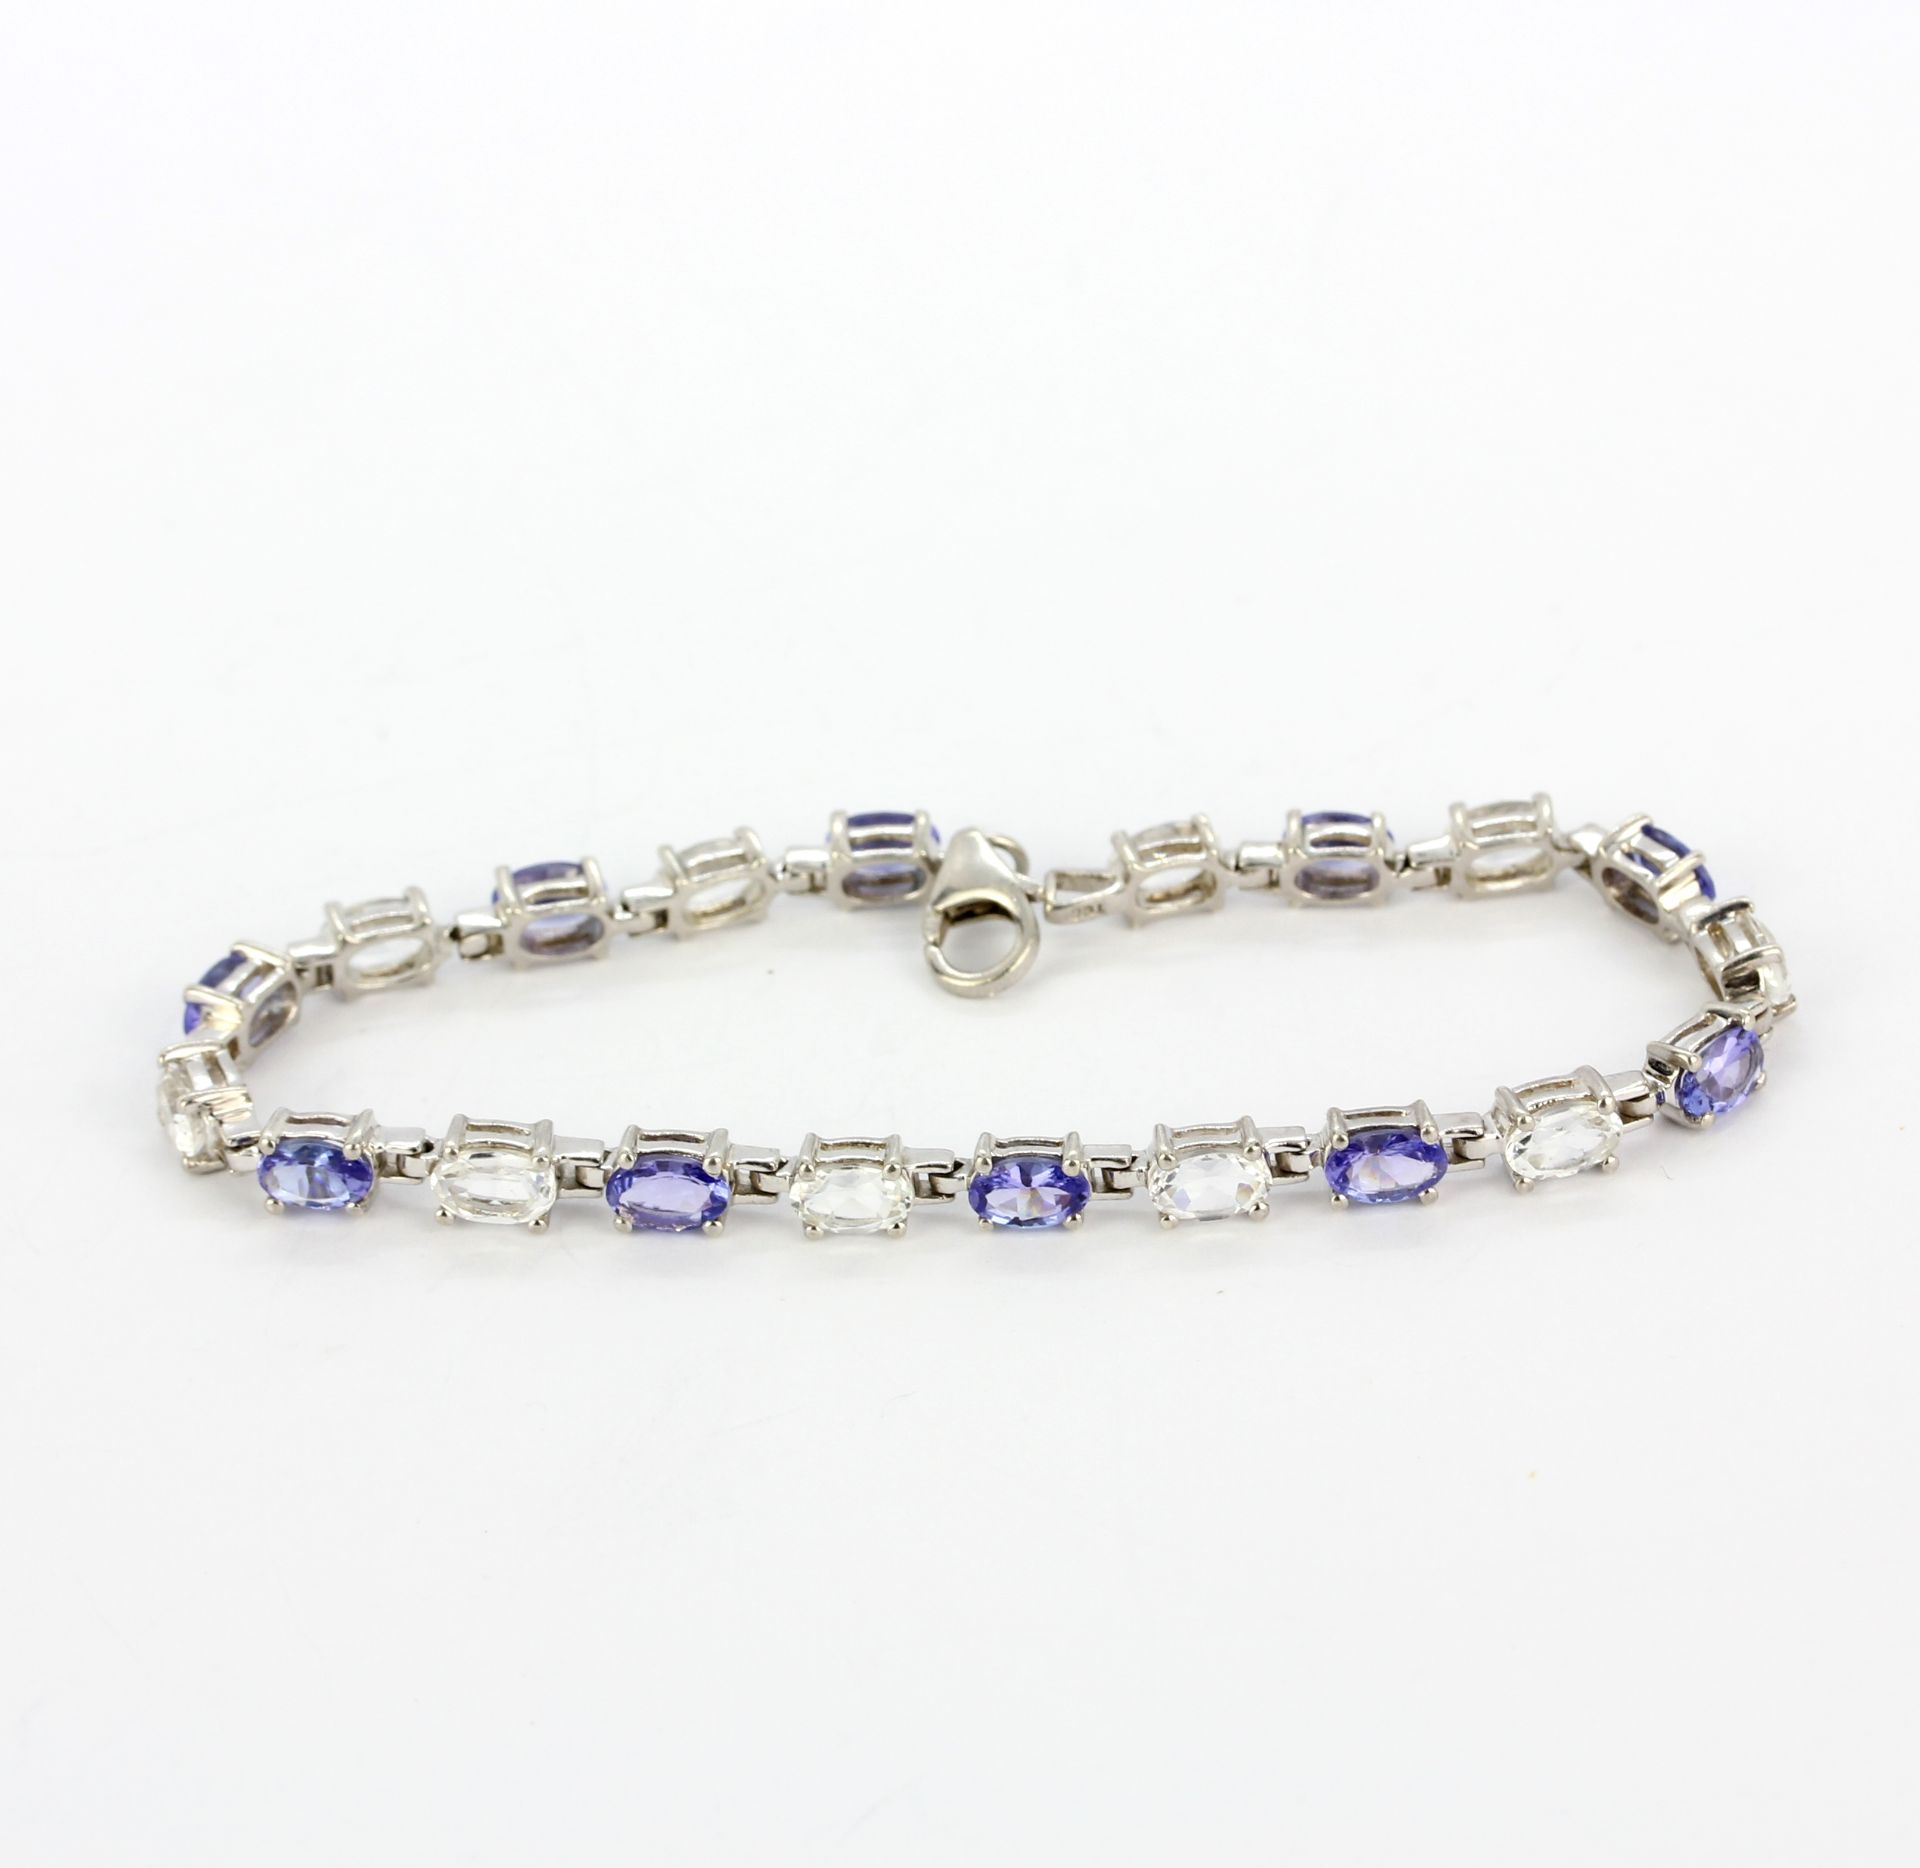 A 925 silver bracelet set with oval cut tanzanites and white topaz, L. 18.5cm.